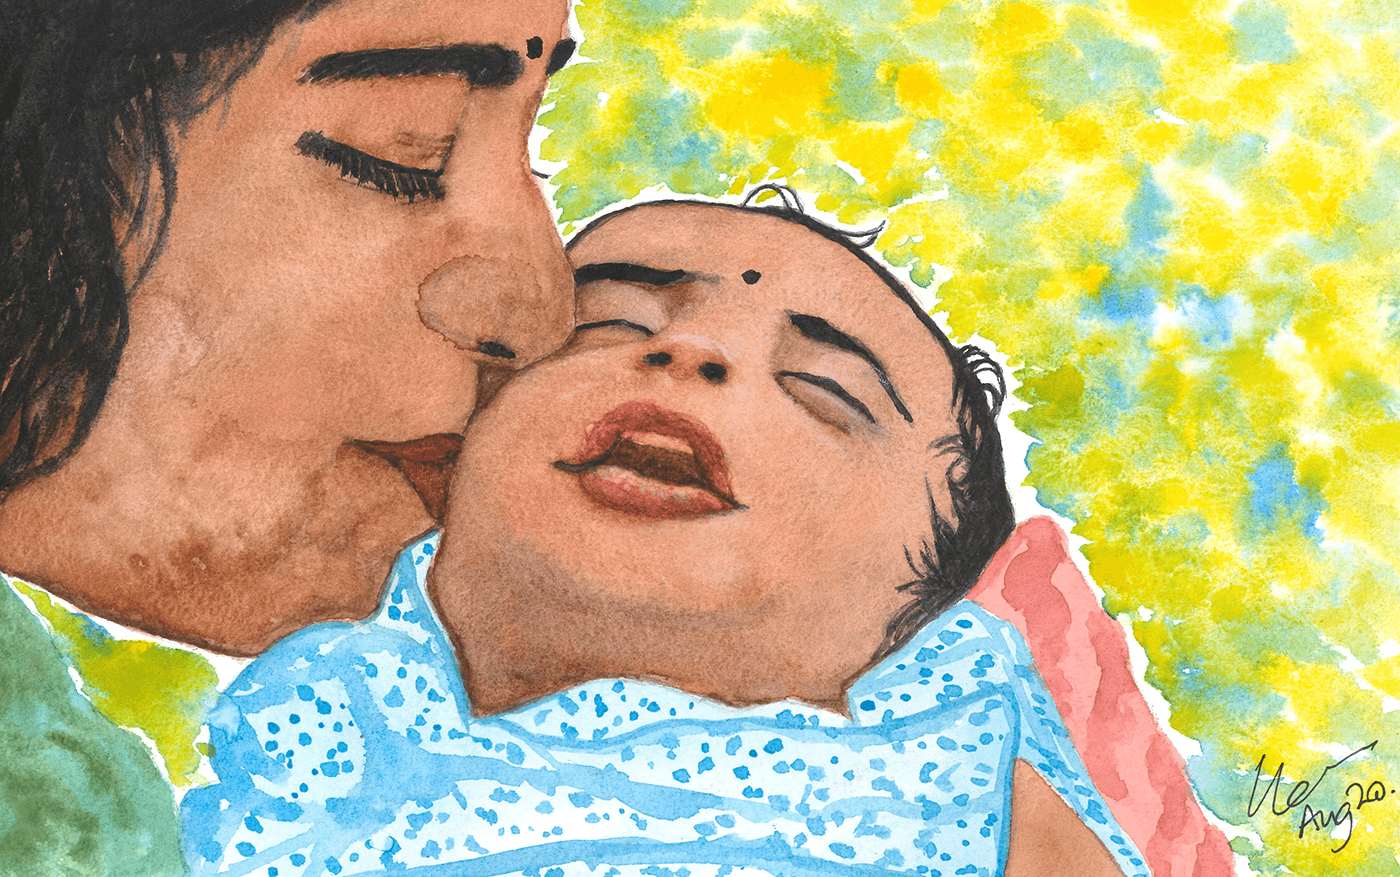 a painting of a woman with brown skin and dark hair kisses her newborn baby